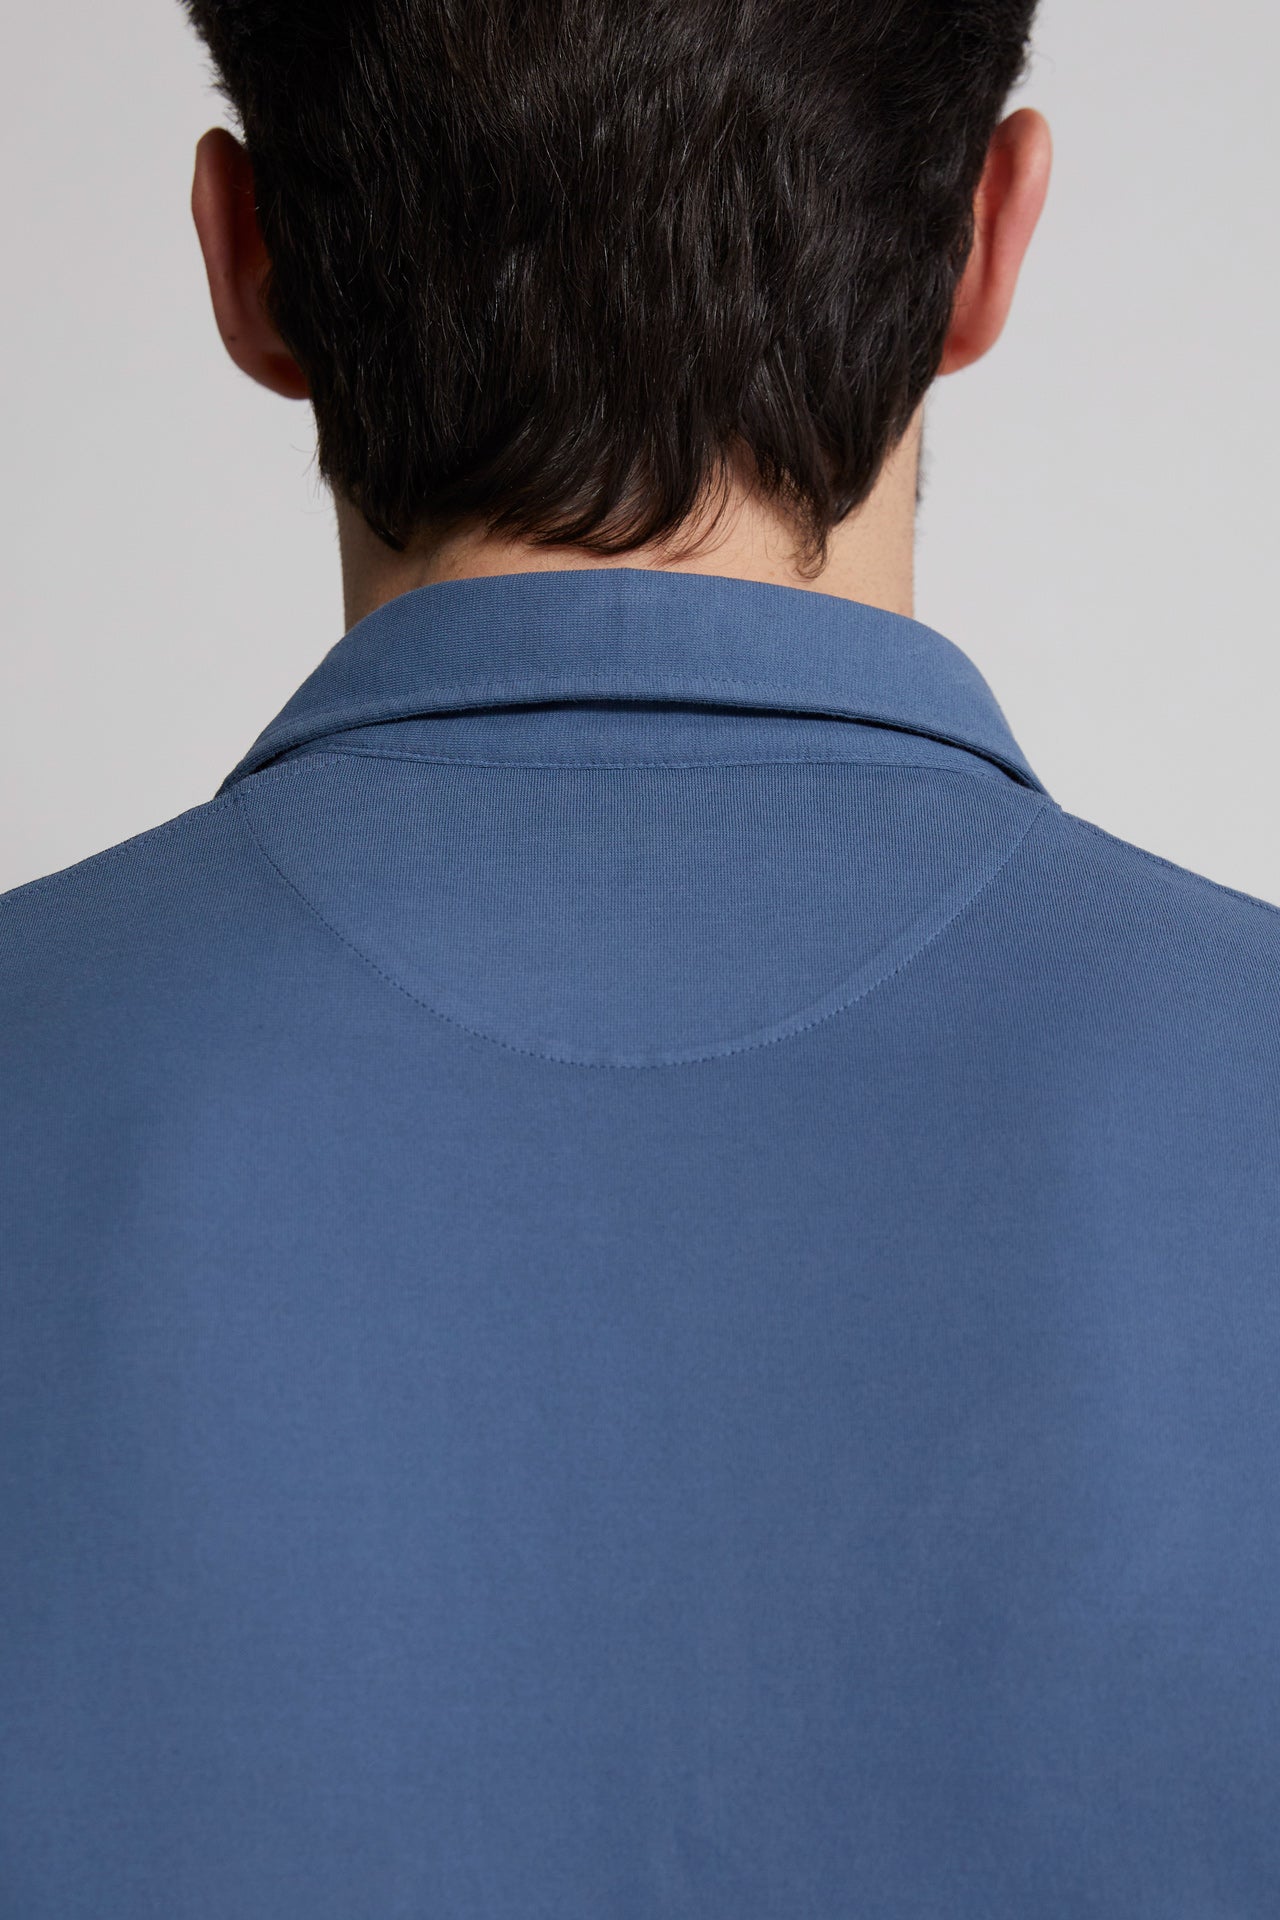 men's iconic cotton polo jersey in blue - back detail